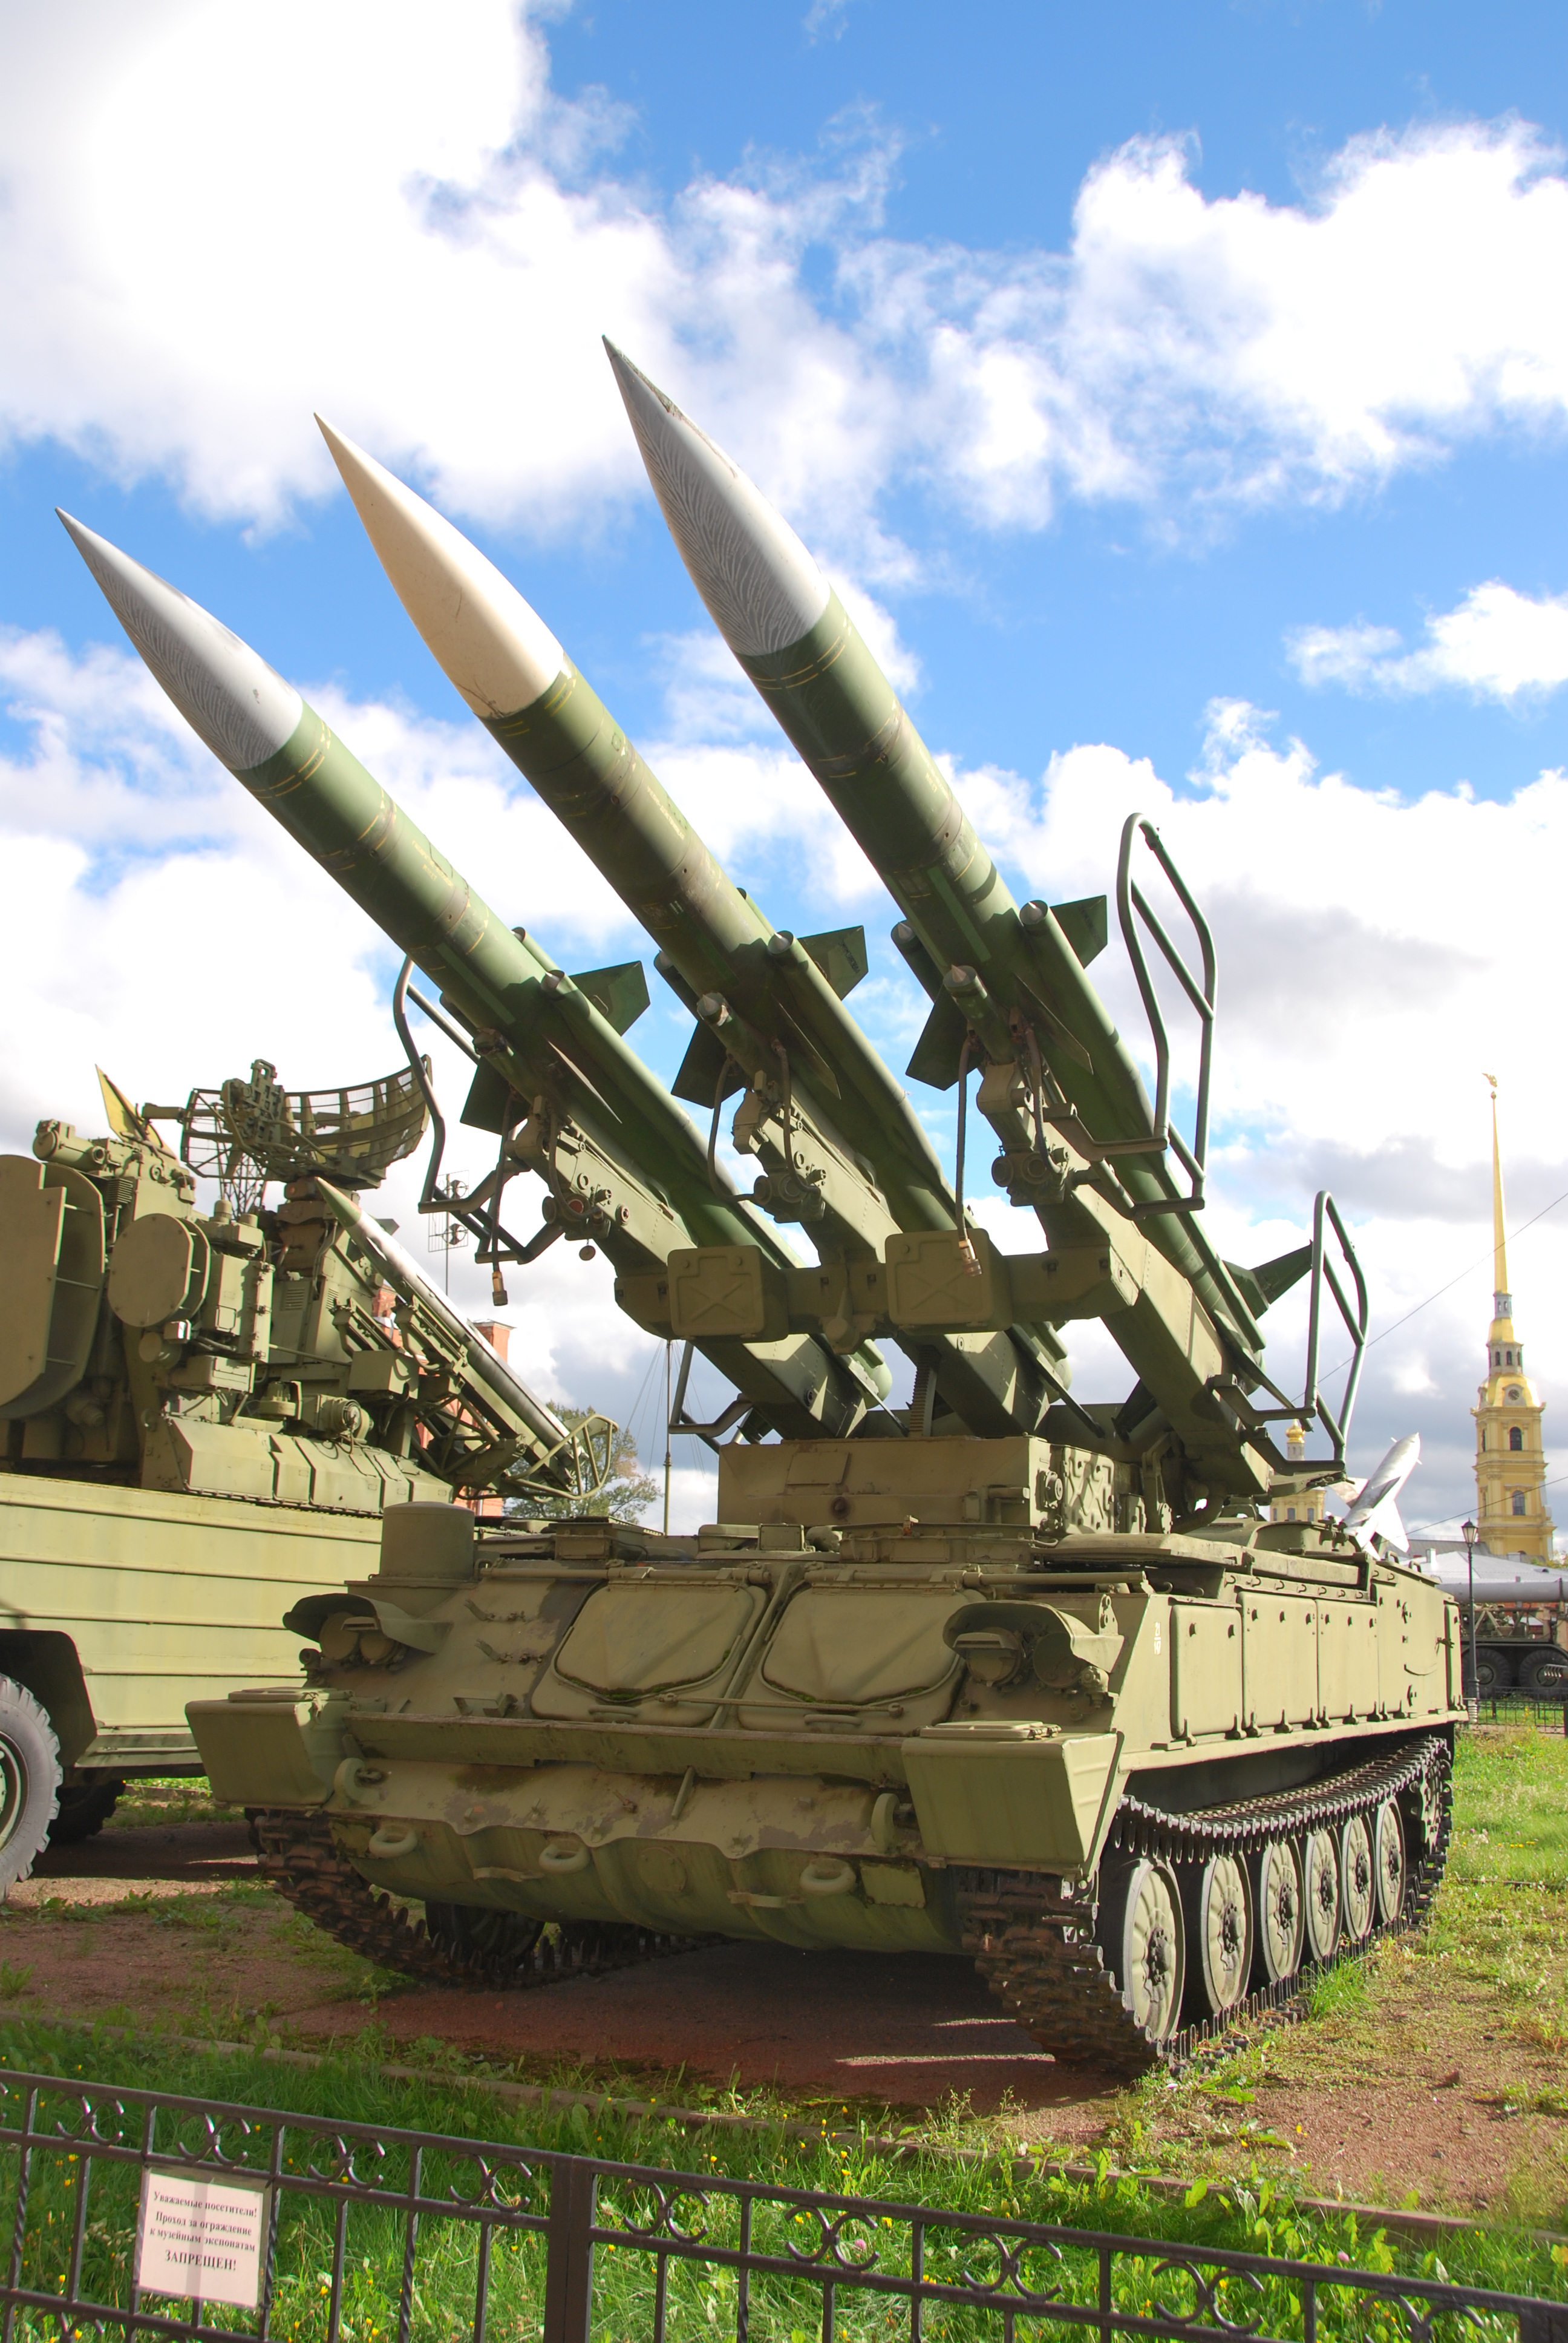 2P25_TEL_with_3_3M9_missiles_of_the_surface-to-air_missile_complex_2K12_%C2%ABKub%C2%BB_in_Military-historical_Museum_of_Artillery%2C_Engineer_and_Signal_Corps_in_Saint-Petersburg%2C_Russia.jpg